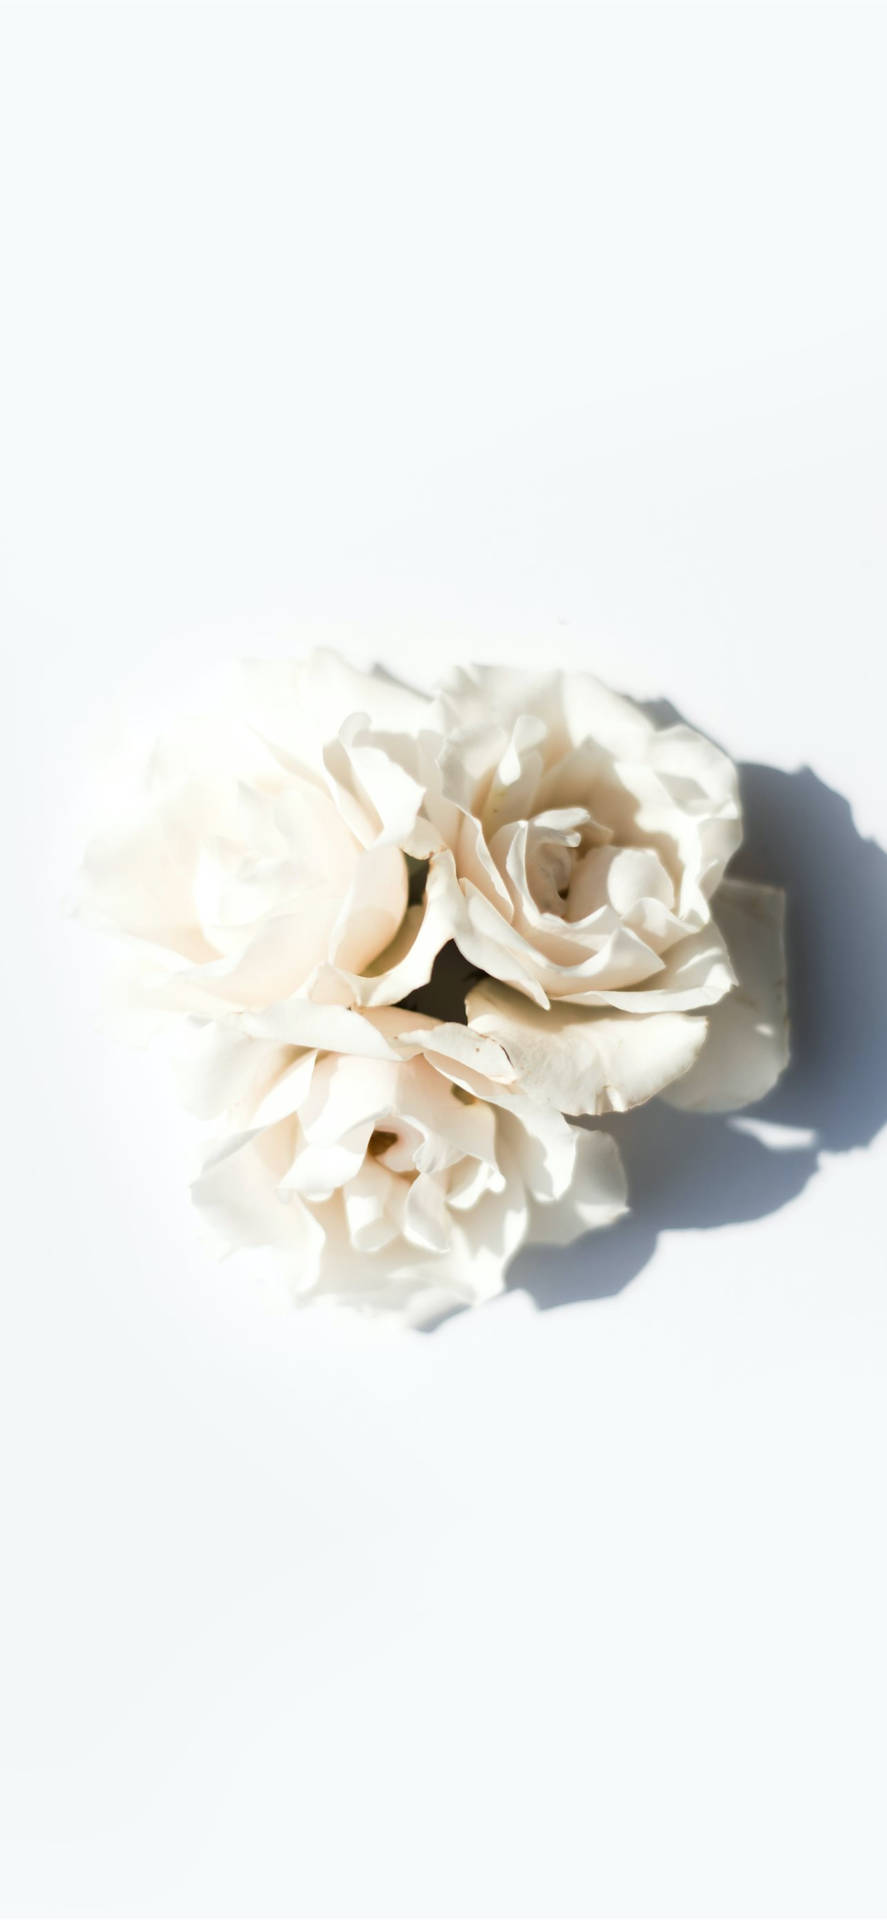 A White Flower Is Shown On A White Surface Wallpaper